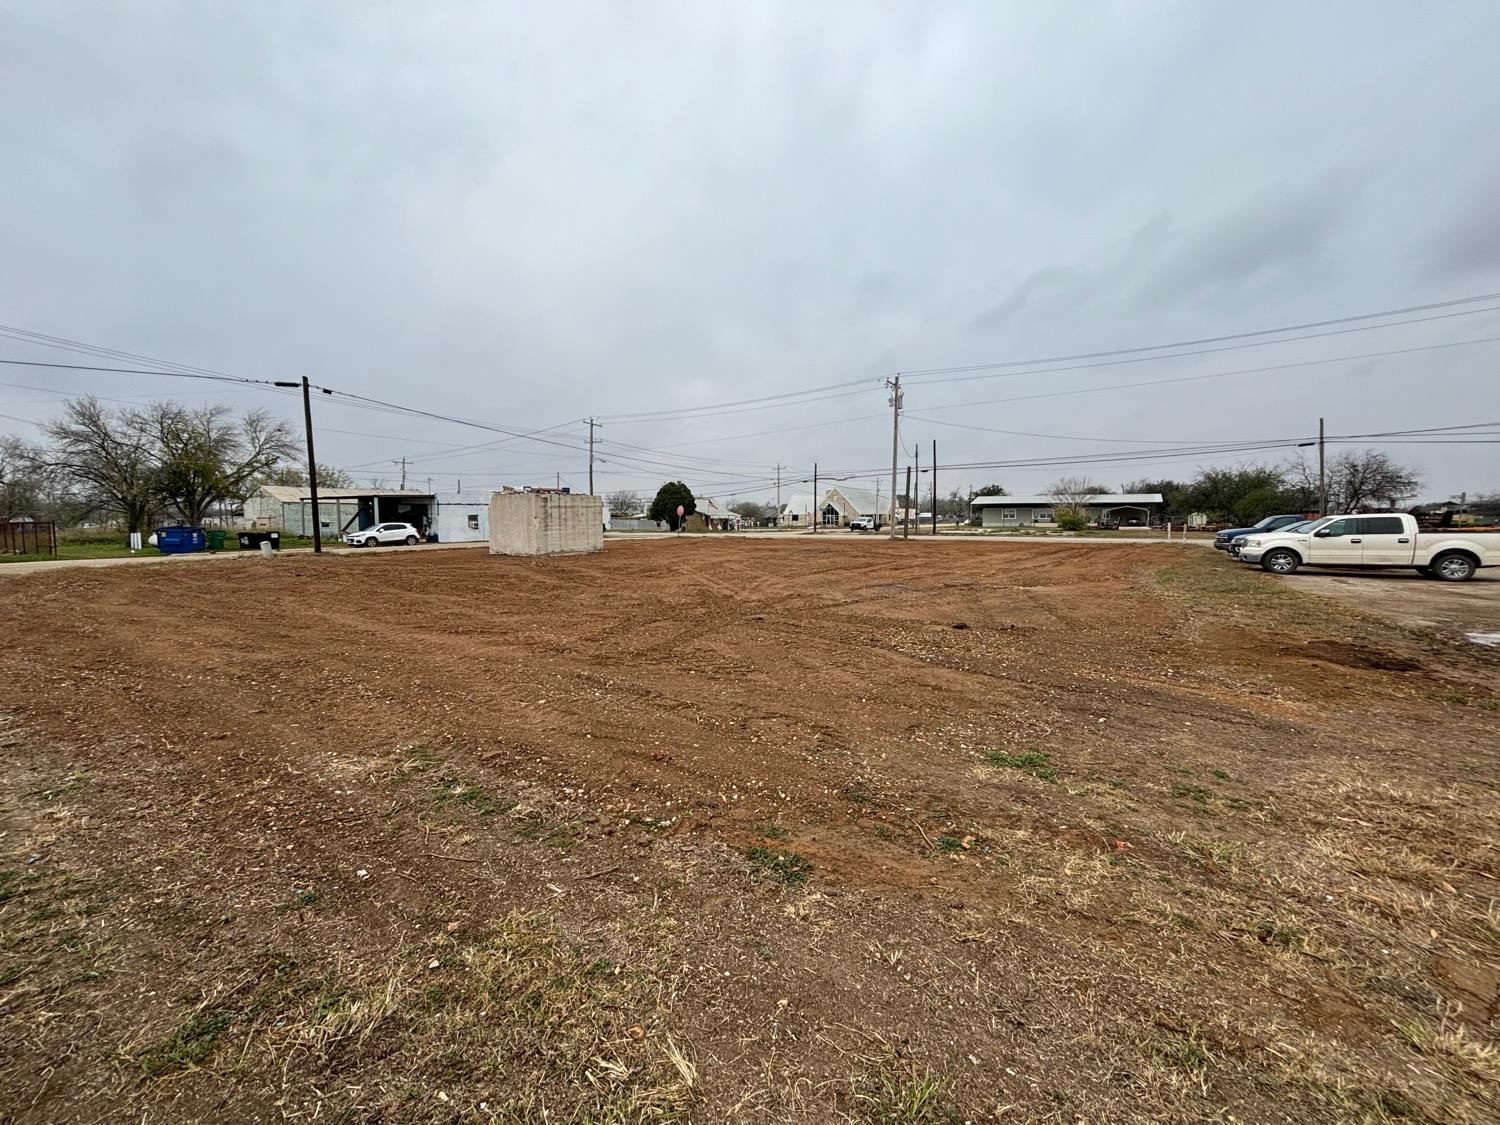 Good looking vacant lot located in downtown Charlotte Texas. Looking for a new owner and someone to spruce it up. It is ready to rock!